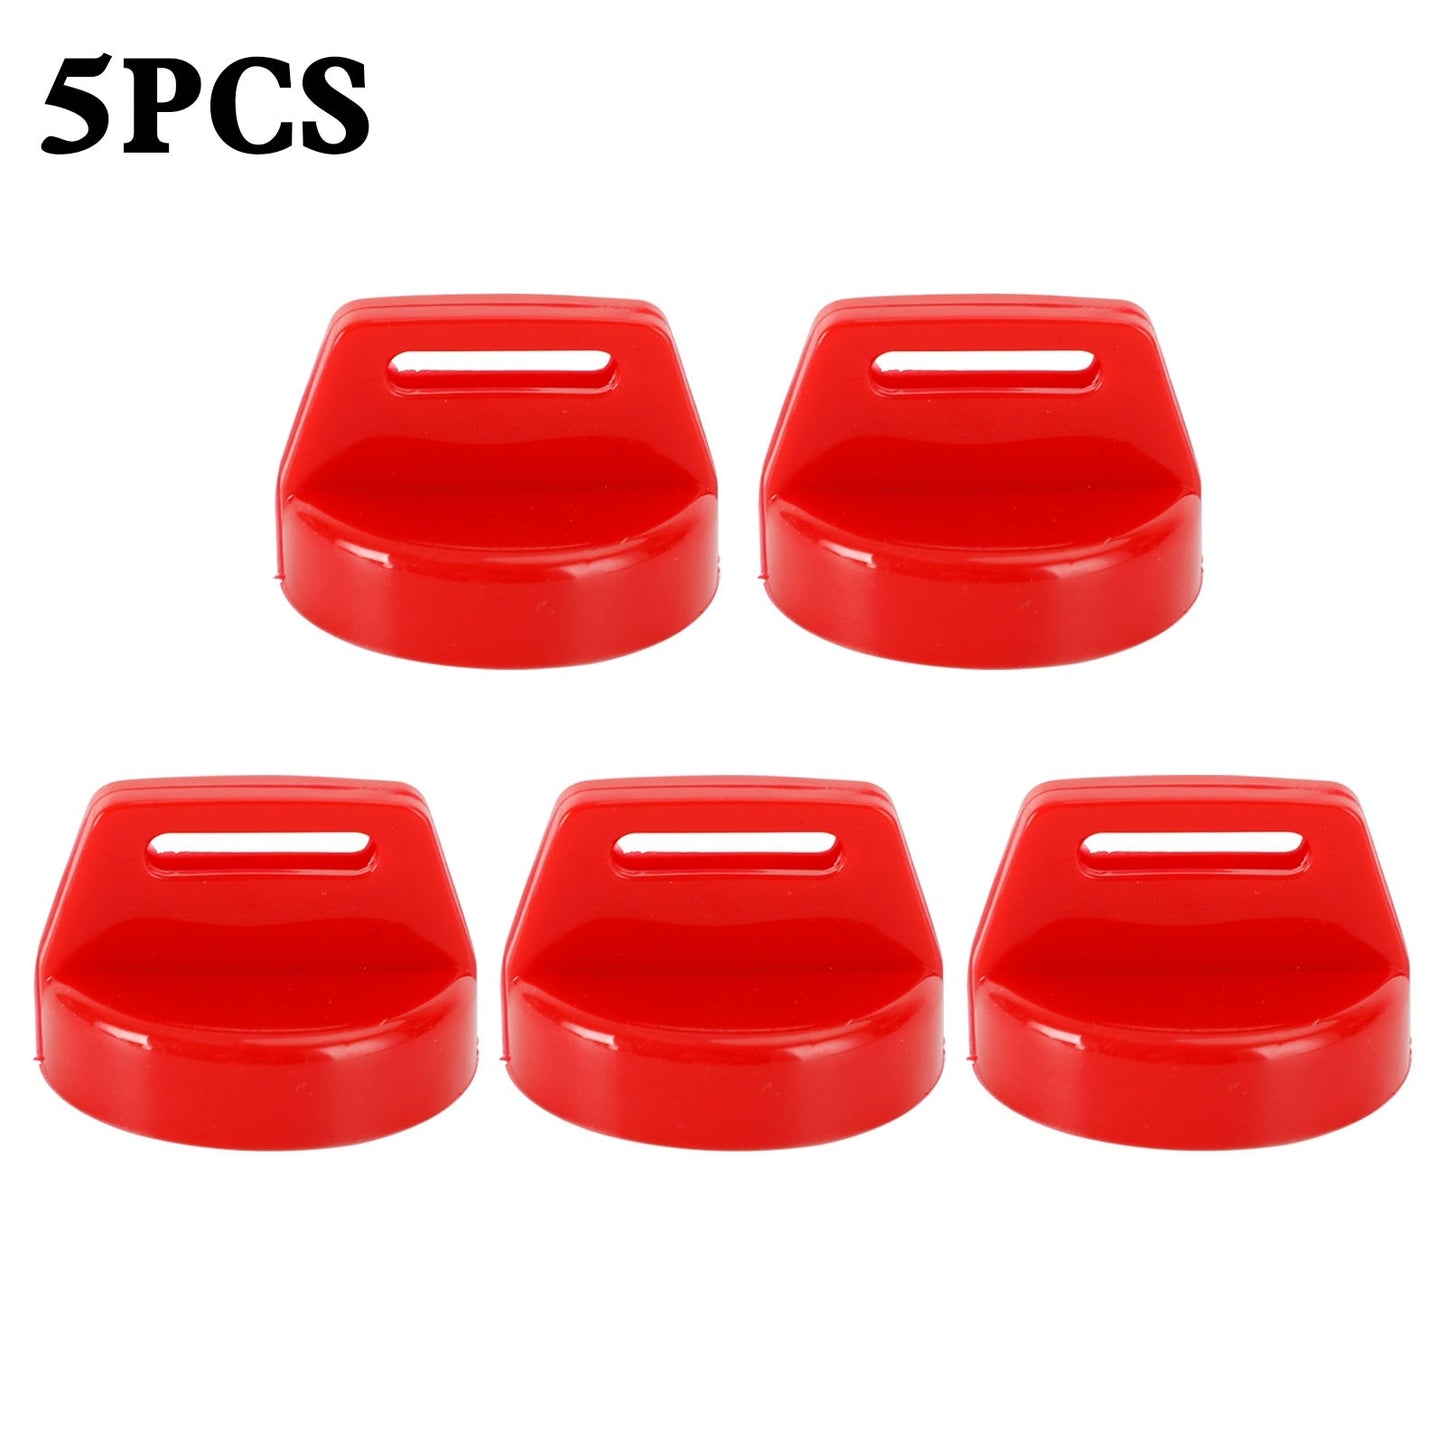 5 Pack Key Switch Cover Red For Polaris 5433534 Sportsman Scrambler Magnum